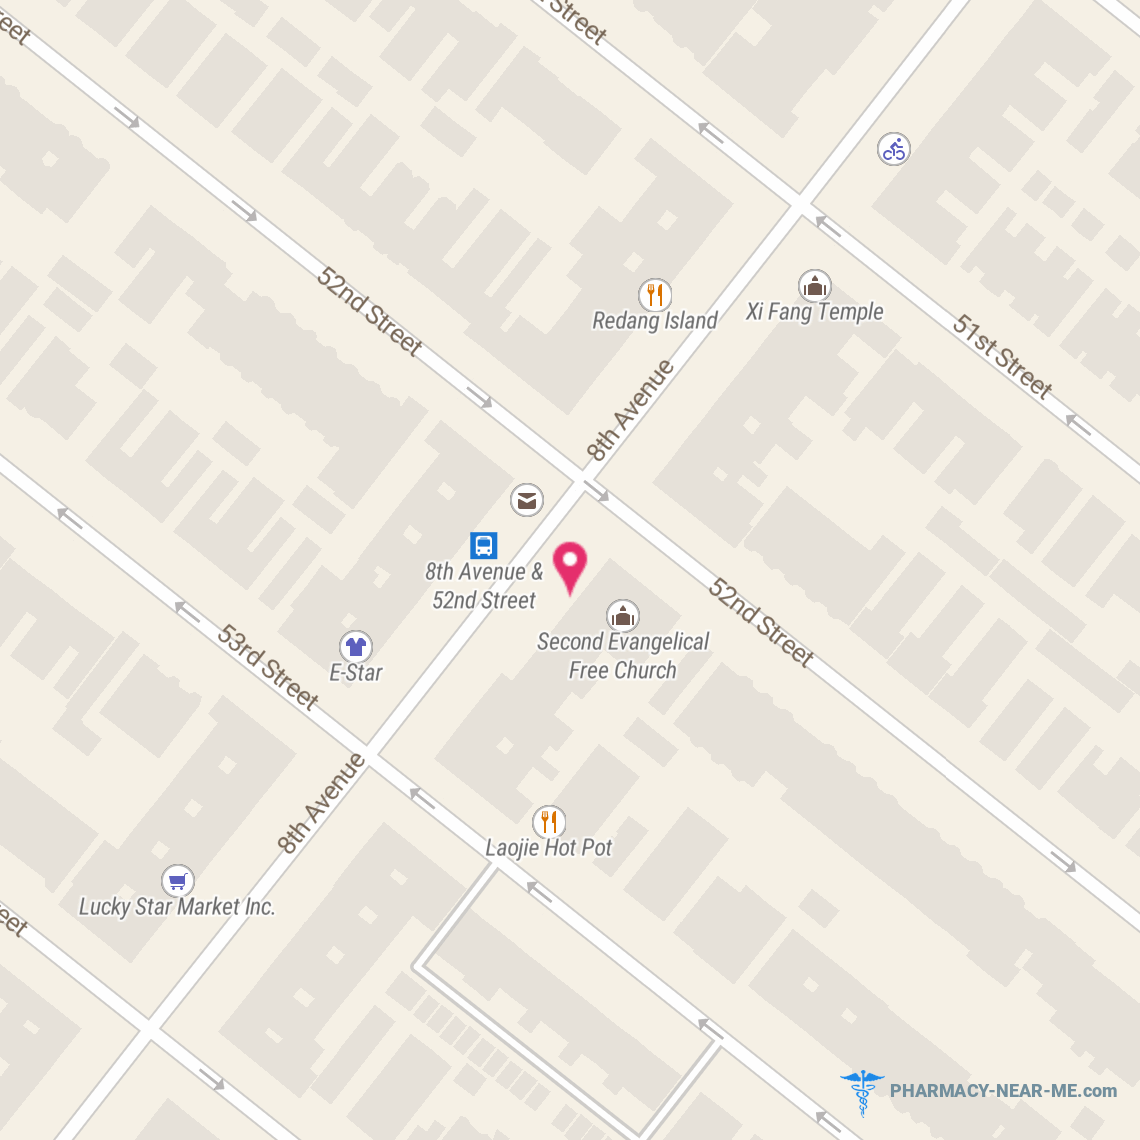 CF53 INC - Pharmacy Hours, Phone, Reviews & Information: 5223 8th Avenue, Brooklyn, New York 11220, United States